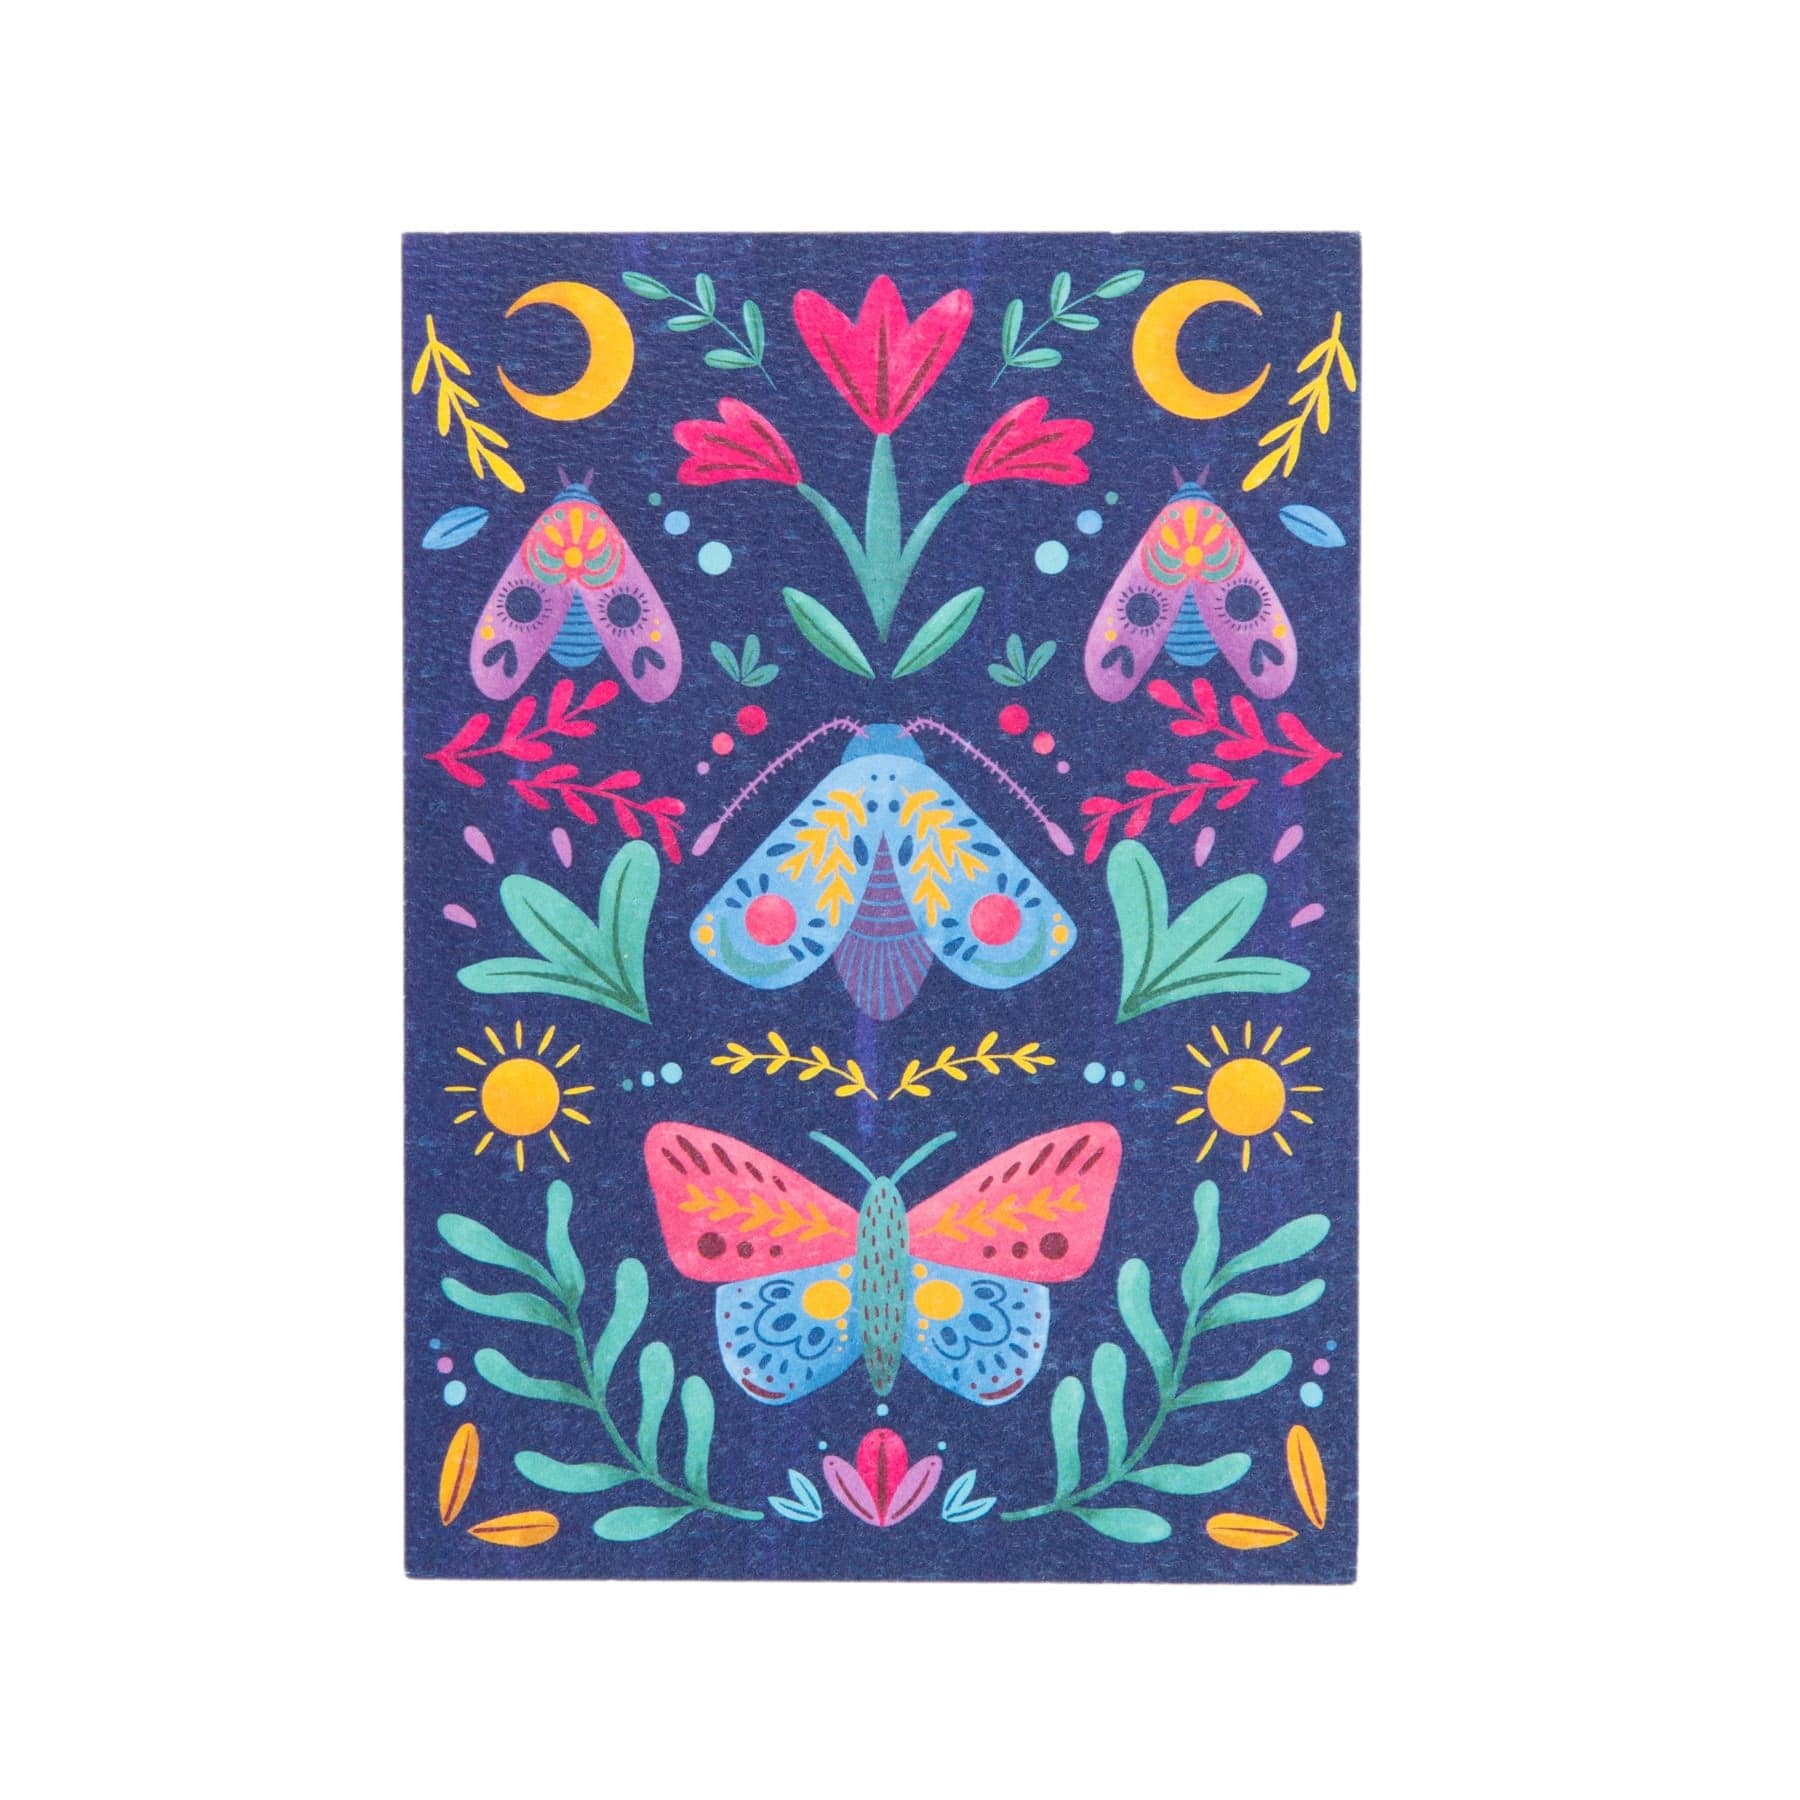 Insects illustrated card